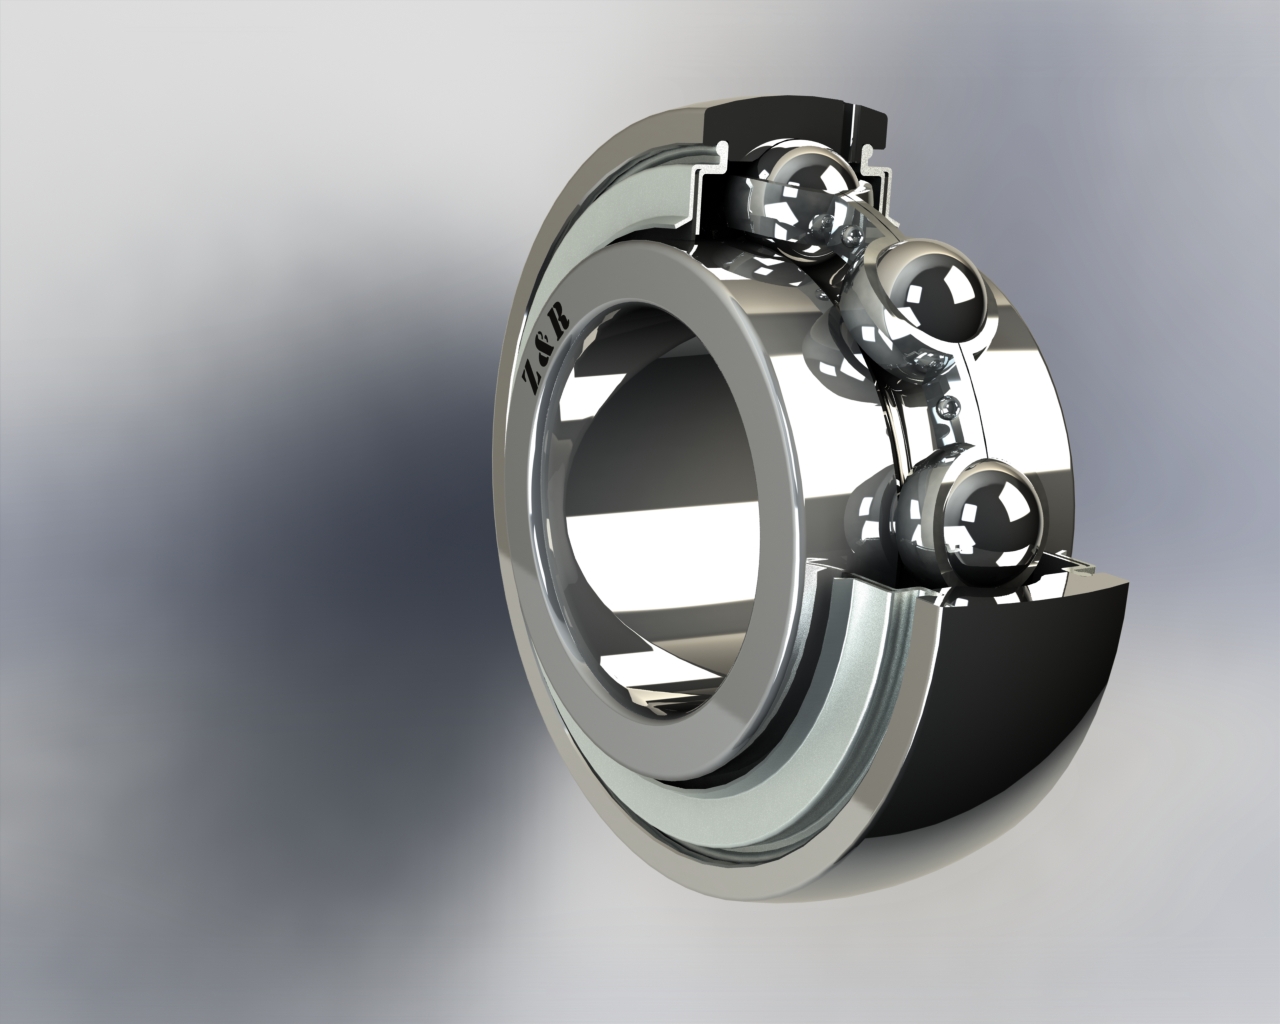 Advantages and installation methods of Insert spherical bearing